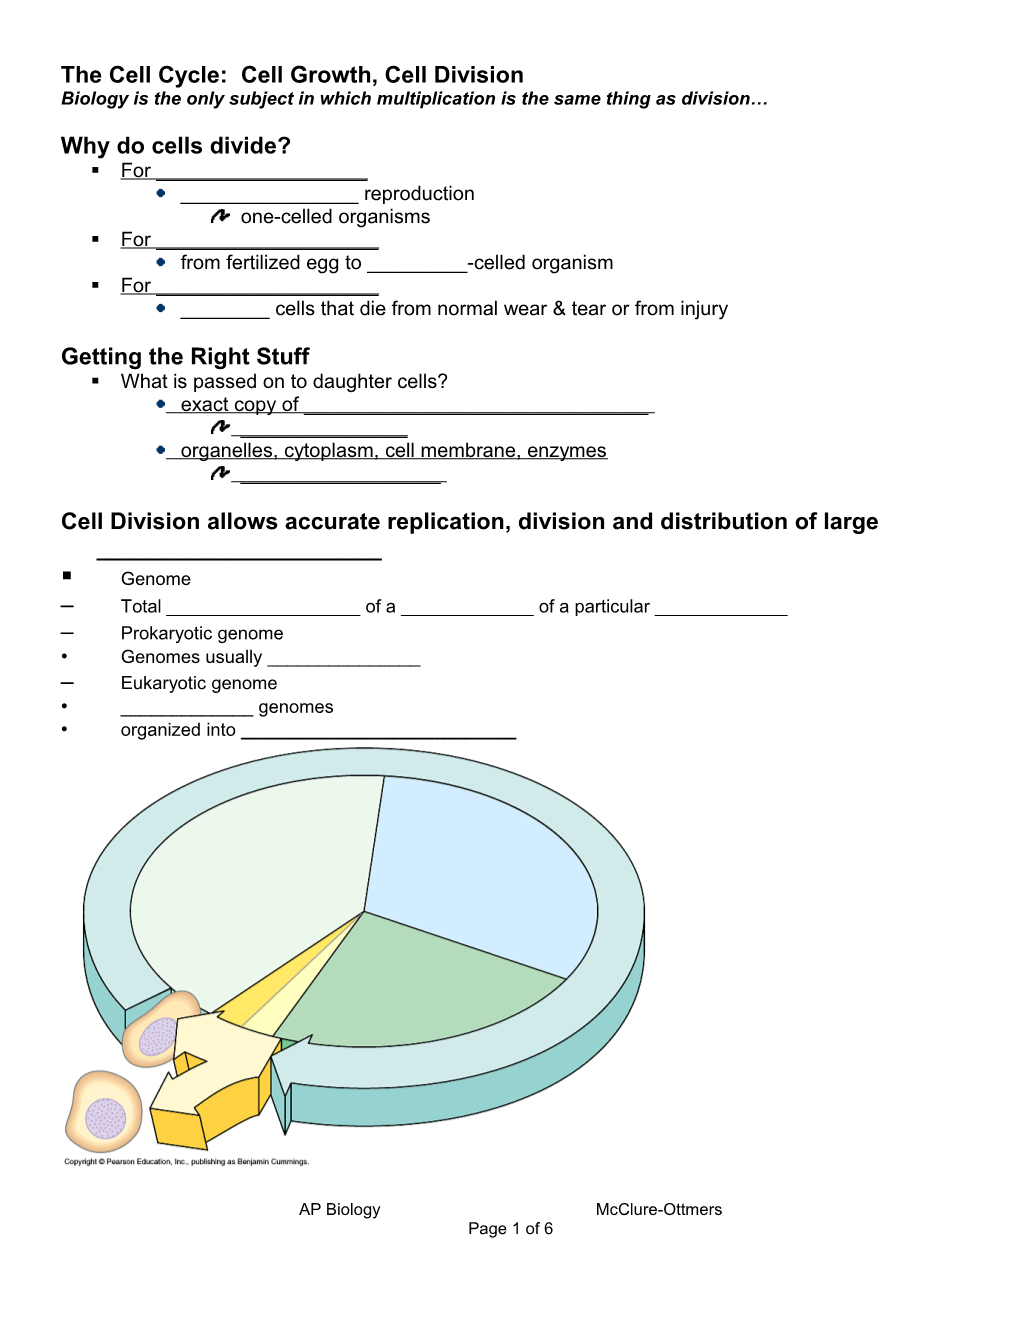 Cell Cycle and Mitosis